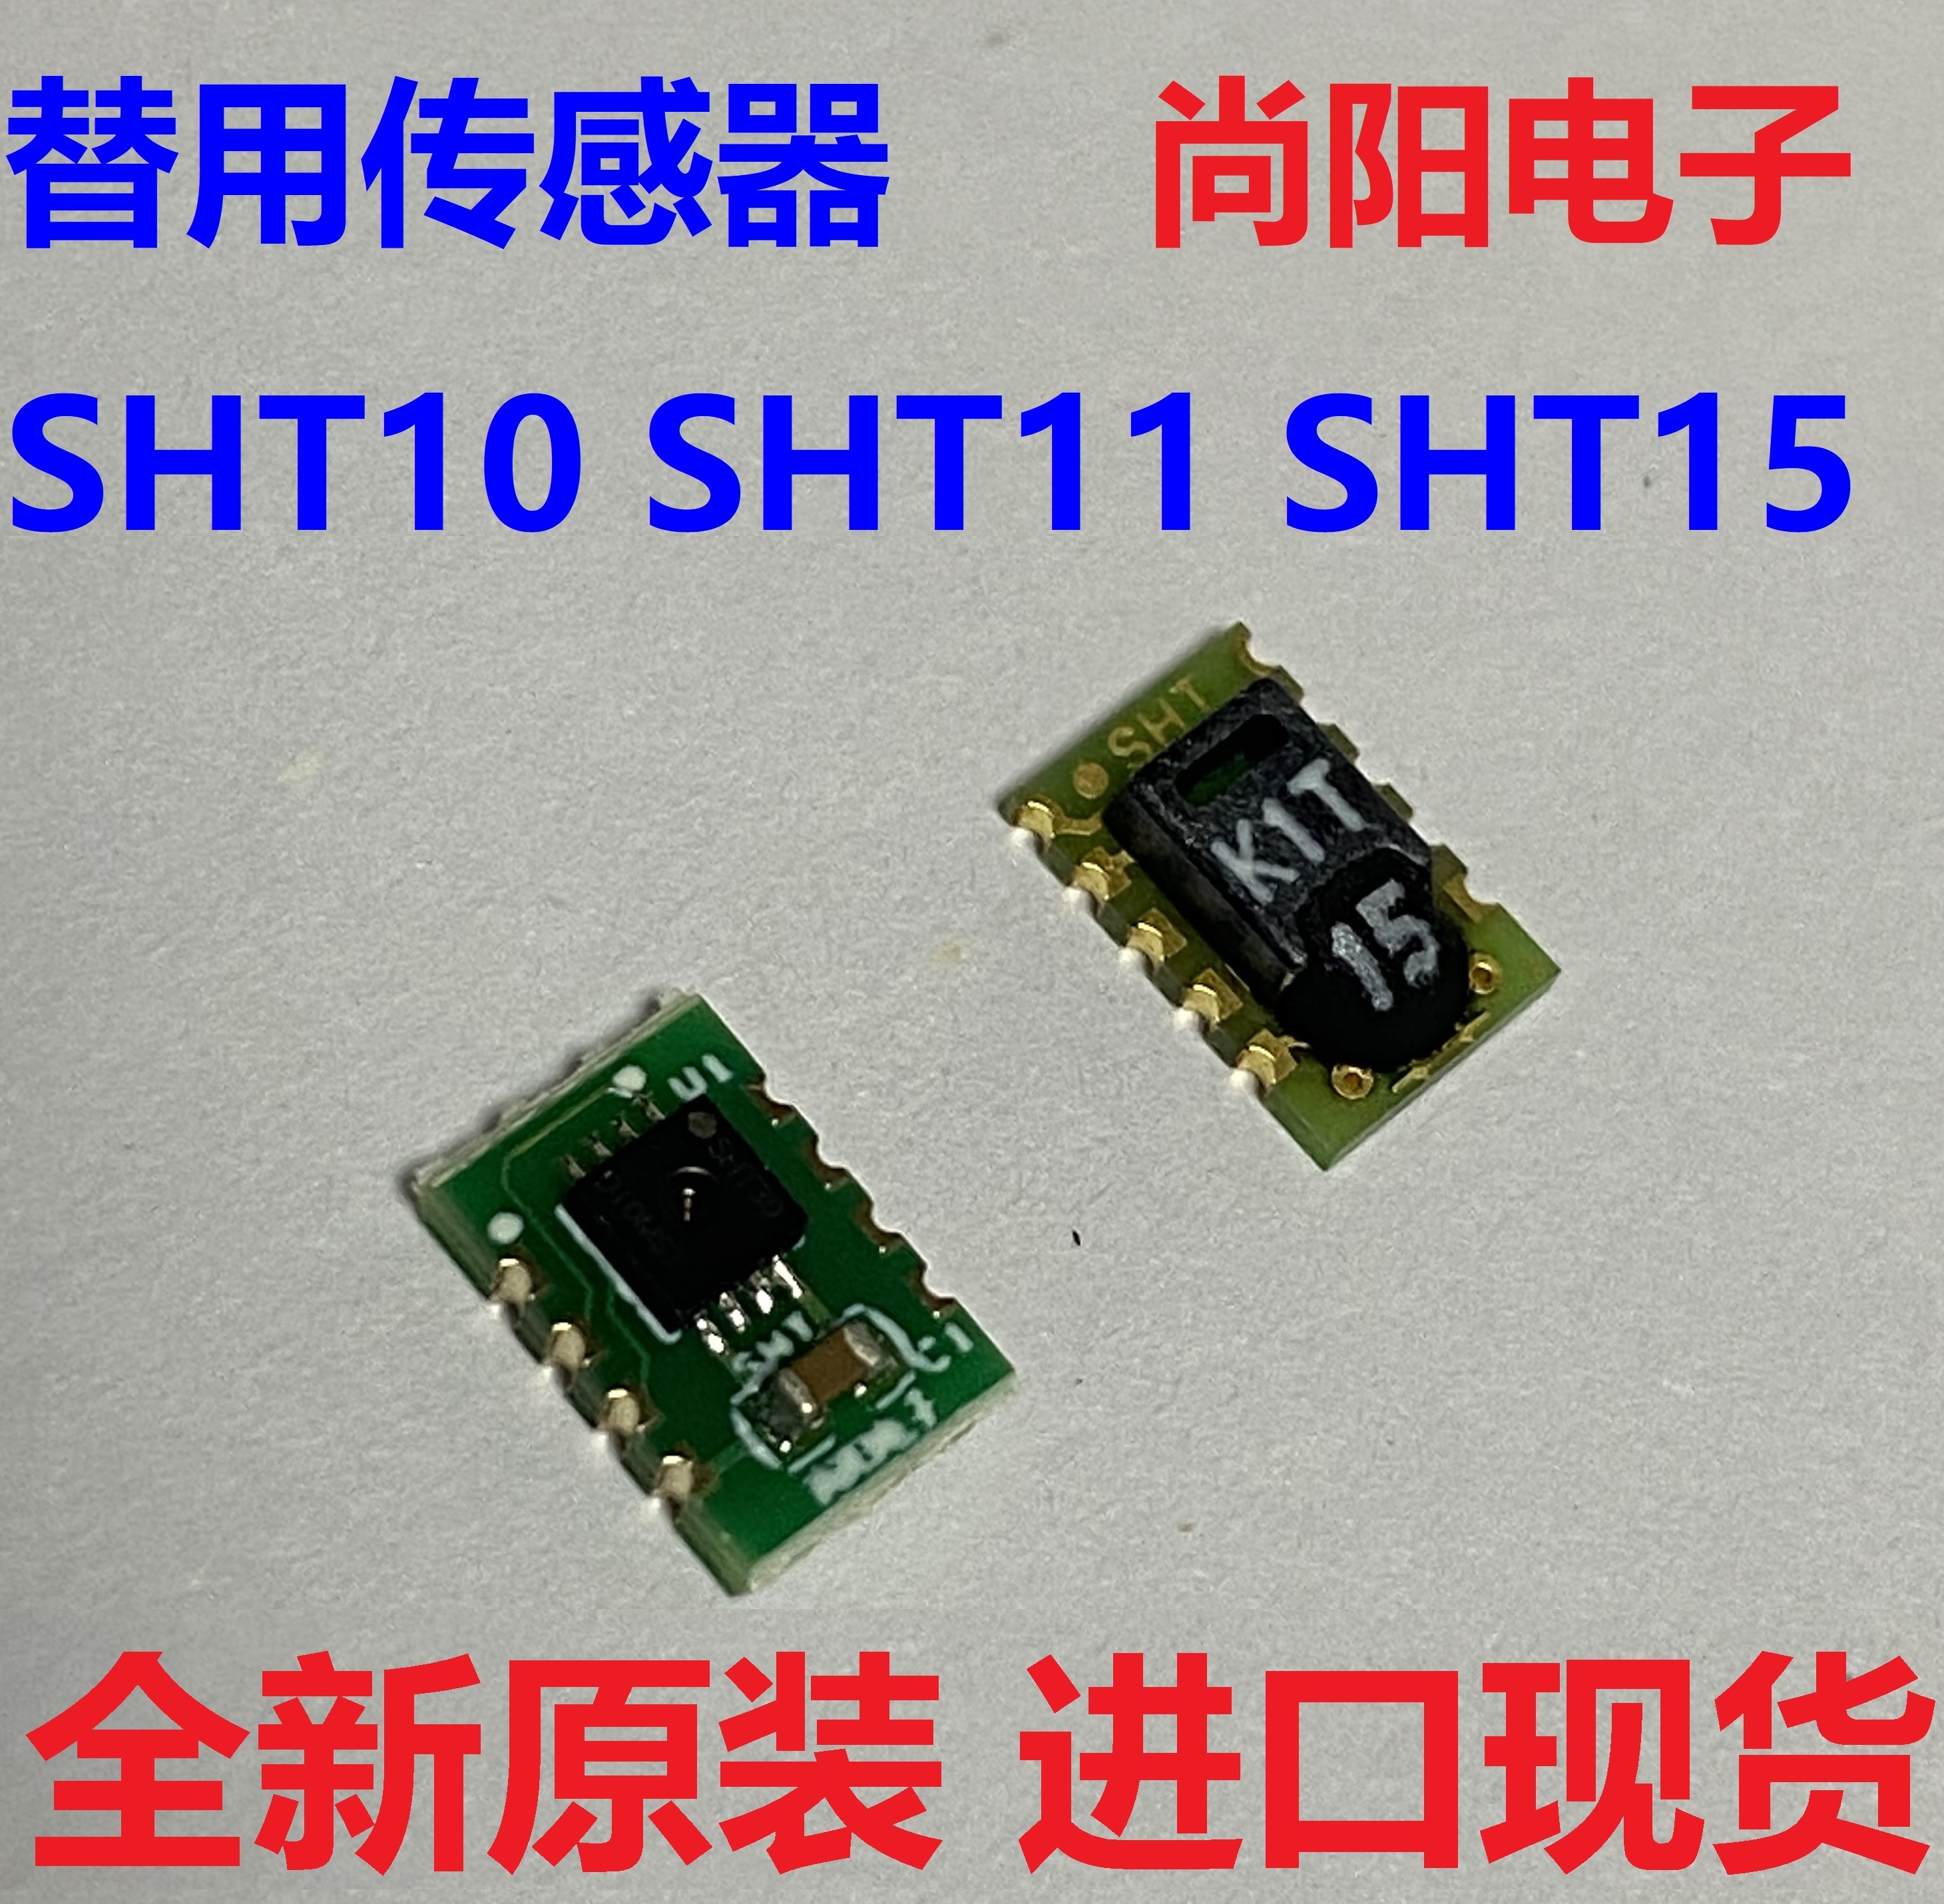 Replacement Of Sy-sht15SHT10 / SHT11 / SHT15 Temperature and humidity sensor for use SY-SHT10 / 11 / 15 provide technology support